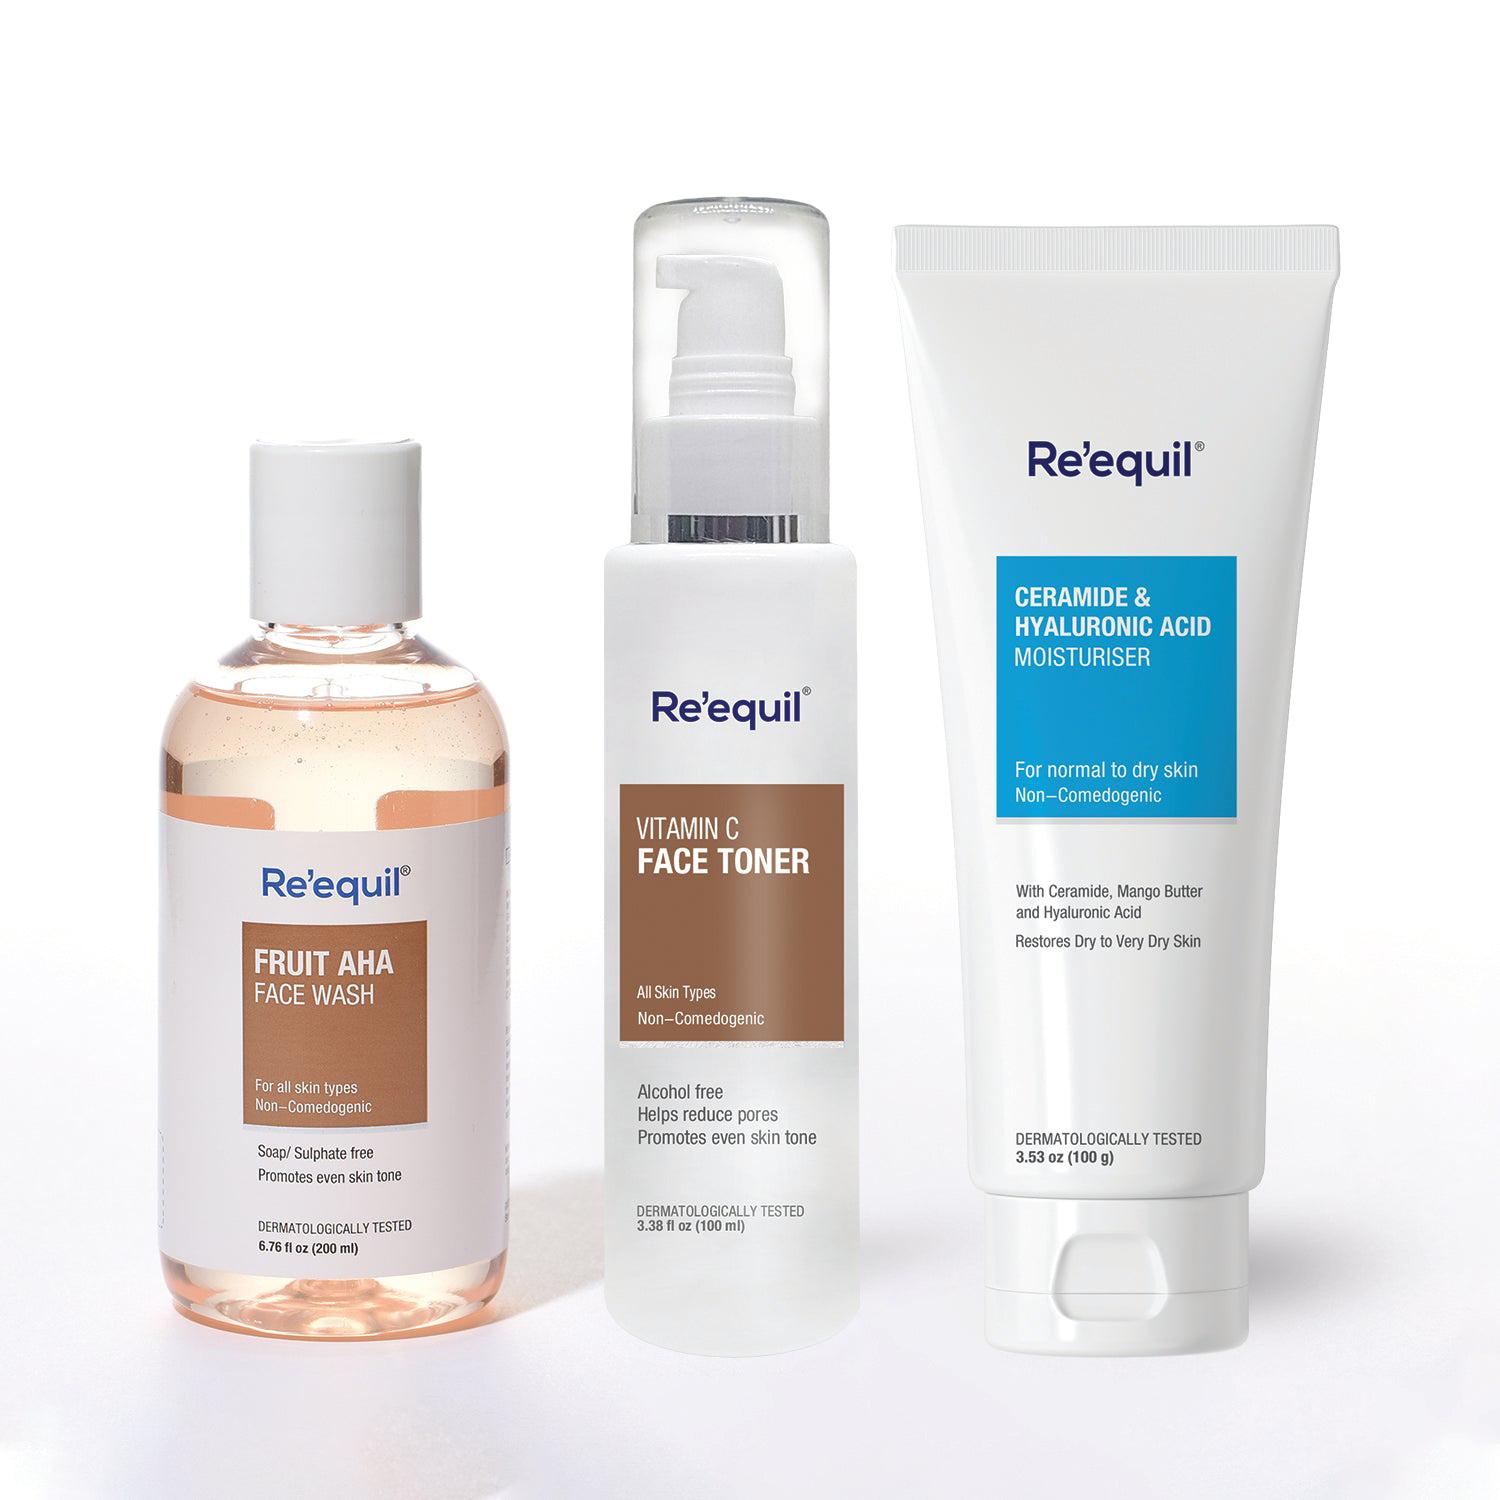 Re'equil | Re'equil CTM Bundle for Dry Skin